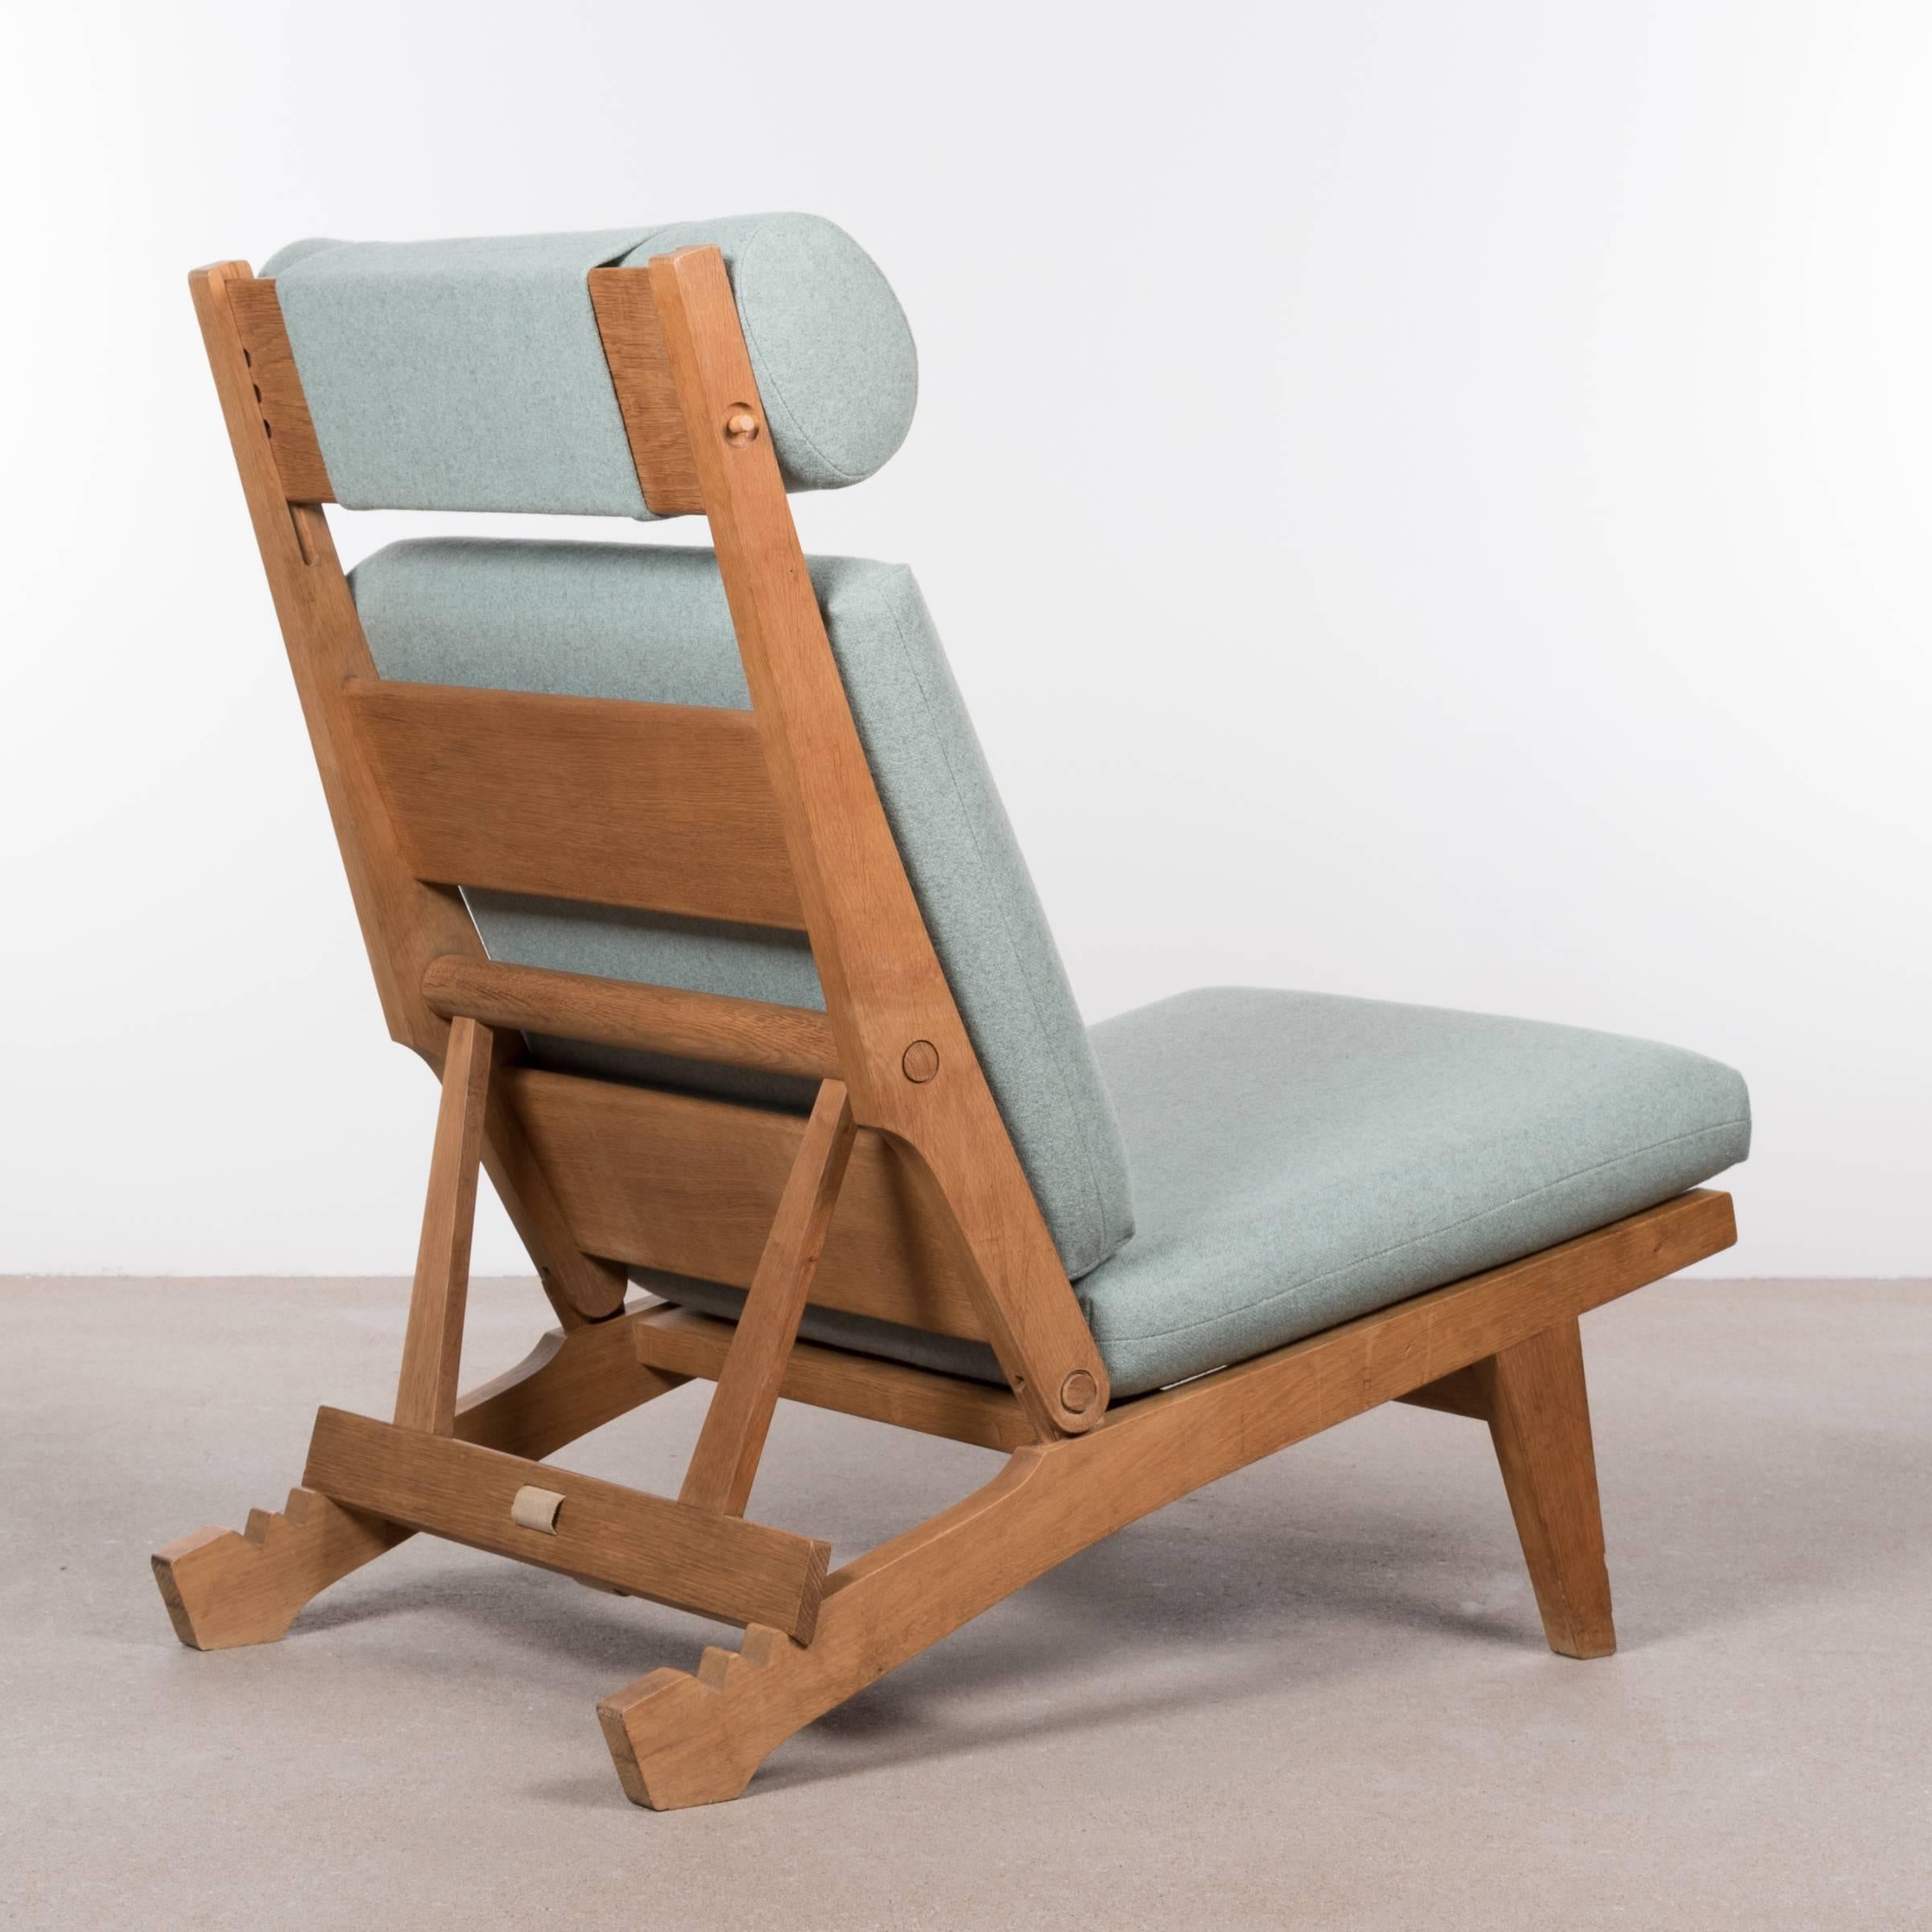 Hans Wegner AP71 folding lounge chair designed in 1968. Adjustable back- and headrest in three positions. Solid oak frame, papercord seating and new cushions in color at choice all in very good condition. Multiple chairs available.